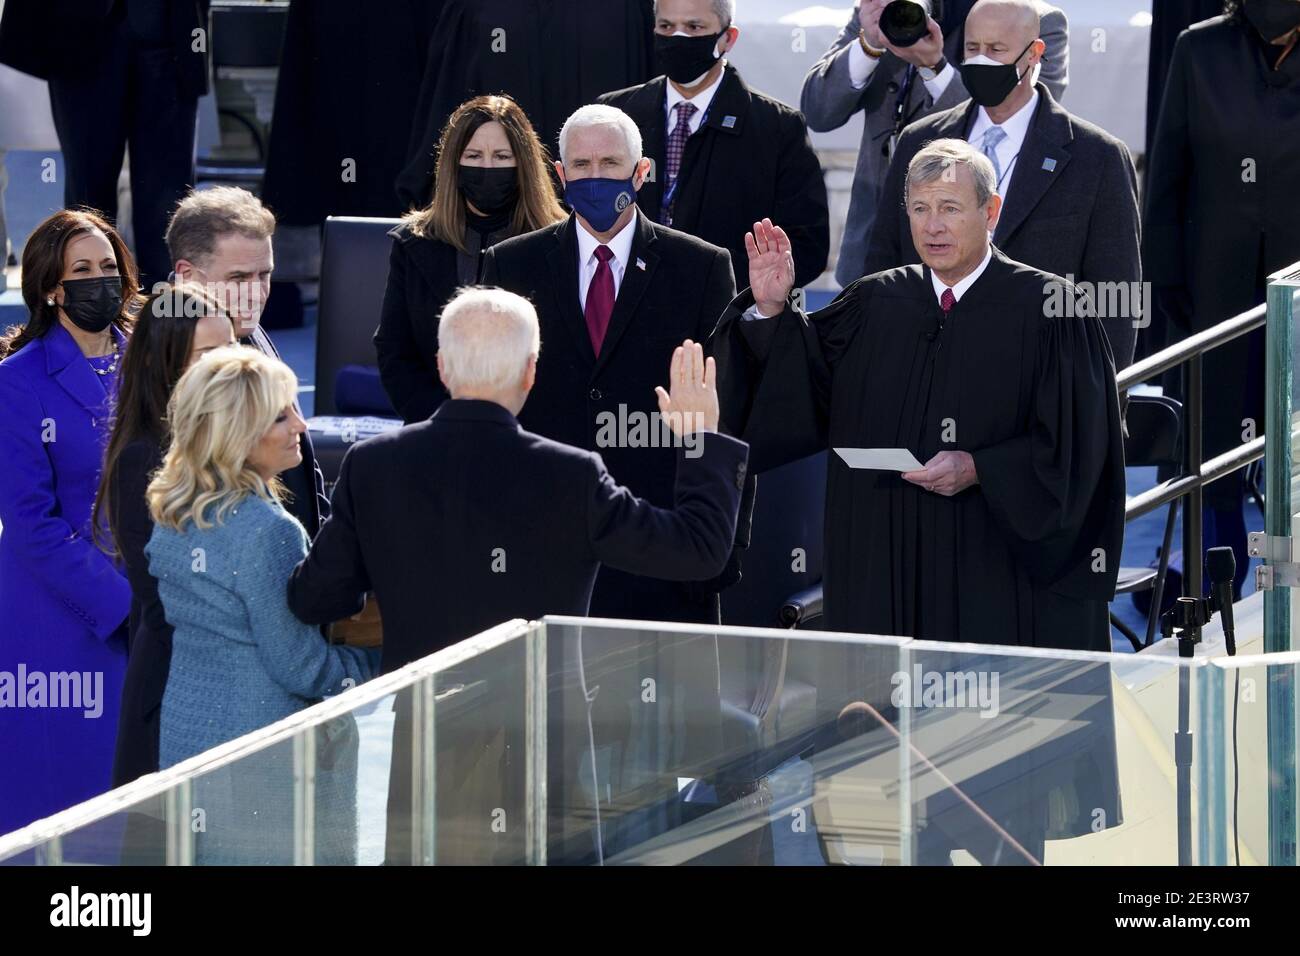 John Roberts, chief justice of the U.S. Supreme Court, right, administers the oath of office to U.S. President-elect Joe Biden, second left, during the 59th presidential inauguration in Washington, DC on Wednesday, Jan. 20, 2021. Biden will propose a broad immigration overhaul on his first day as president, including a shortened pathway to U.S. citizenship for undocumented migrants - a complete reversal from Donald Trump's immigration restrictions and crackdowns, but one that faces major roadblocks in Congress. Photo by Kevin Dietsch/UPI Stock Photo